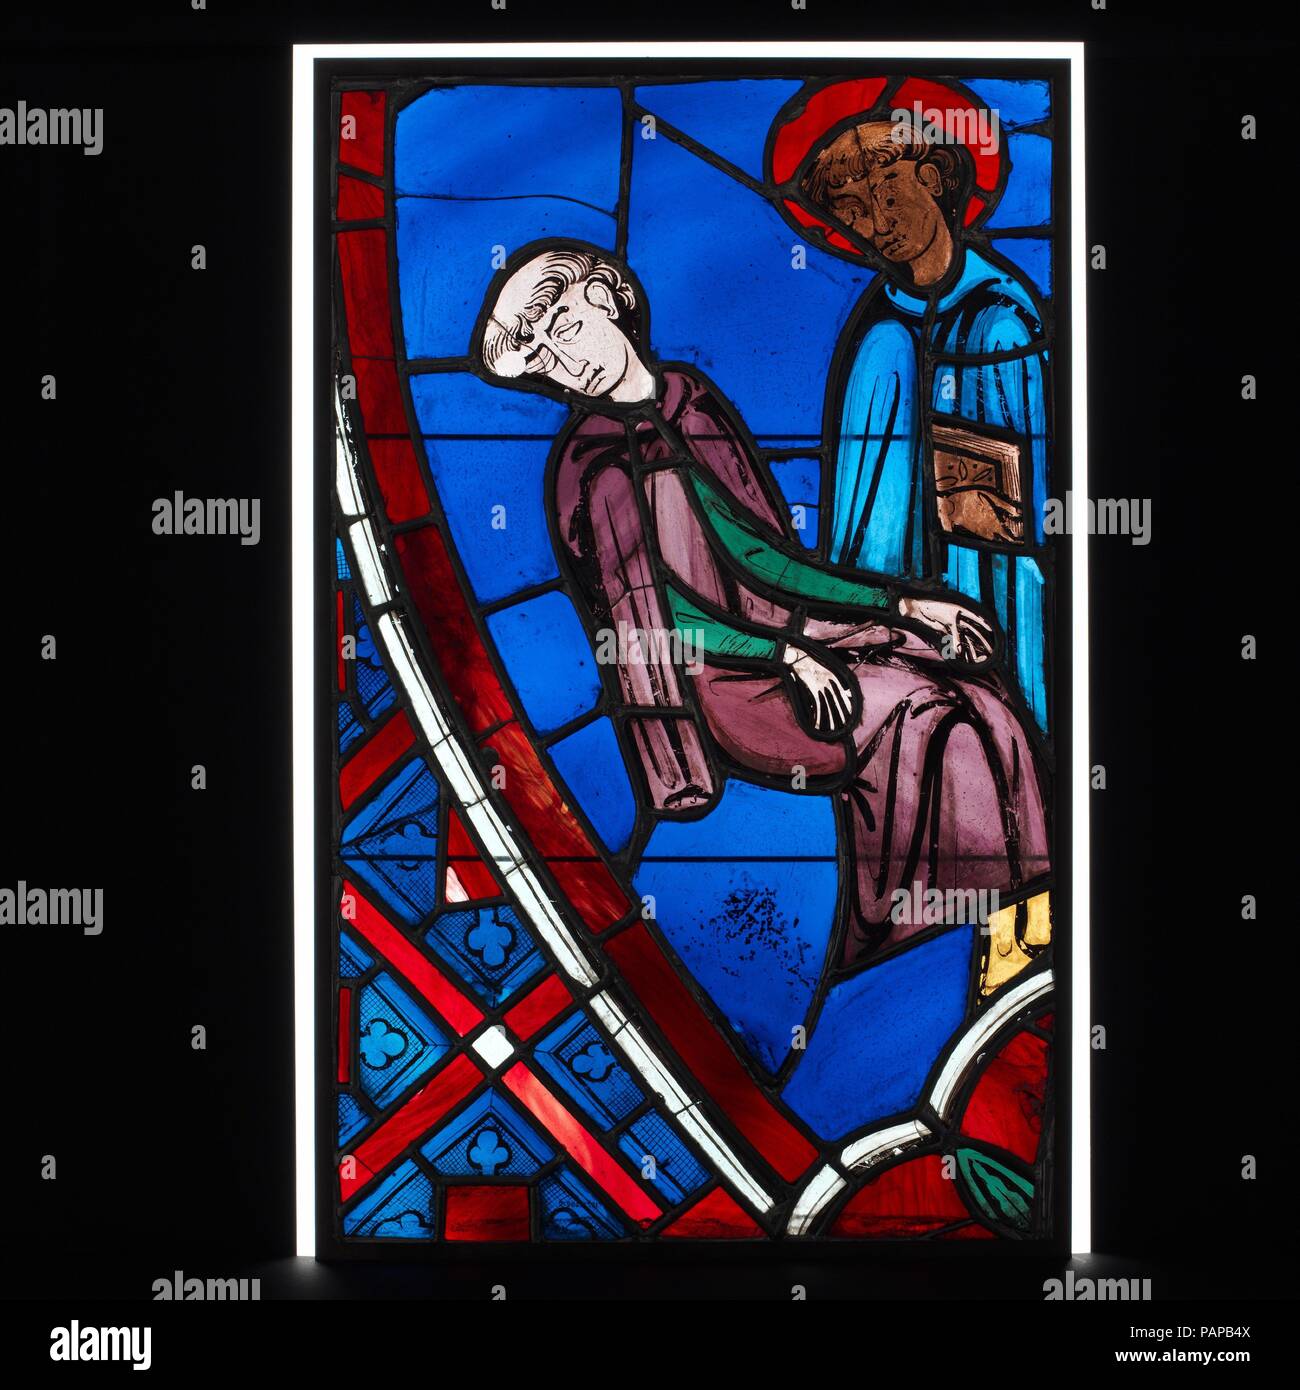 Vision of Saint Germain of Paris. Culture: French. Dimensions: Overall: 25 1/8 x 15 3/4 in. (63.8 x 40 cm). Date: 1245-47.  This panel is one of two scenes from the Legend of Saint Germain of Paris.  Here Germain appears posthumously in a dream to a monk from Saint-Germain-des-Prés, exhorting the brother to maintain his faith. The figures dominate the compositions, fully commanding the dark blue ground against which they are placed. Details of the setting are minimal, lending a sense of the otherworldly to the vision, and forms are suggested by color masses, contrast of tone, and painted line. Stock Photo